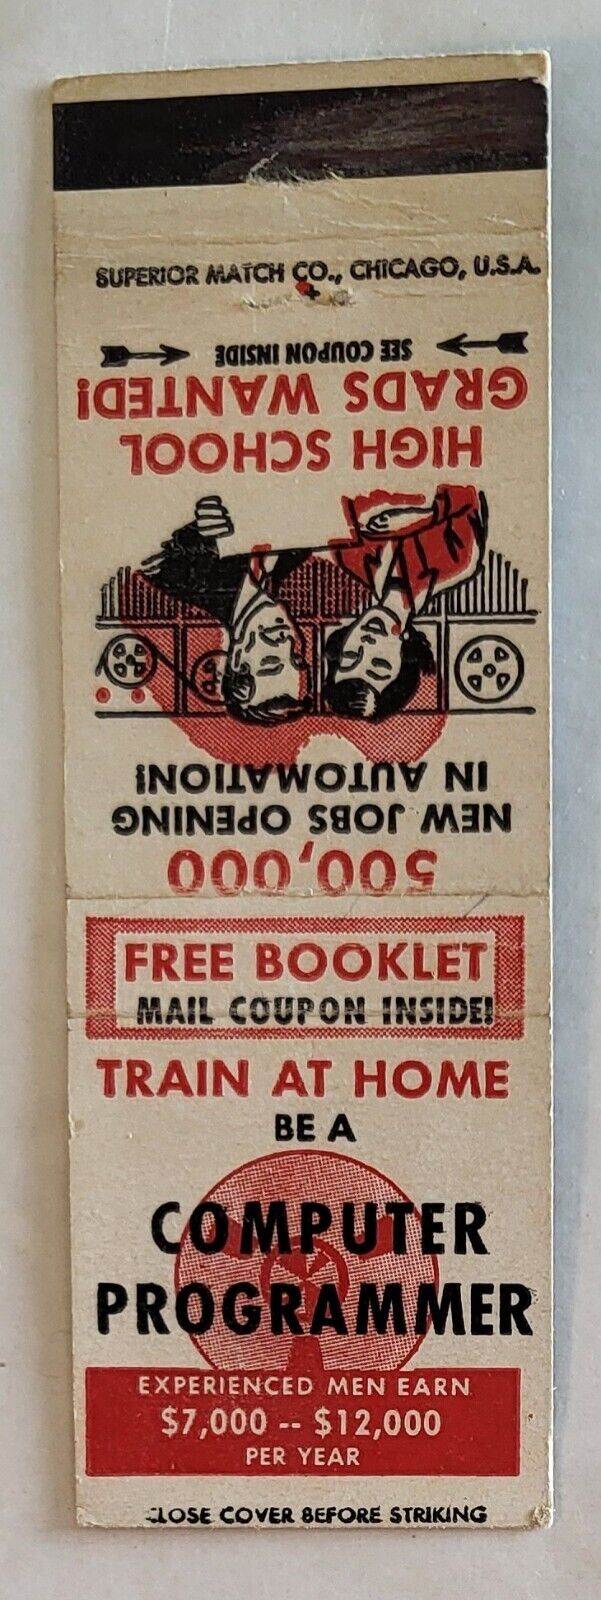 Vintage Matchbook Cover....Become Computer Programmer at LaSalle Ext University 